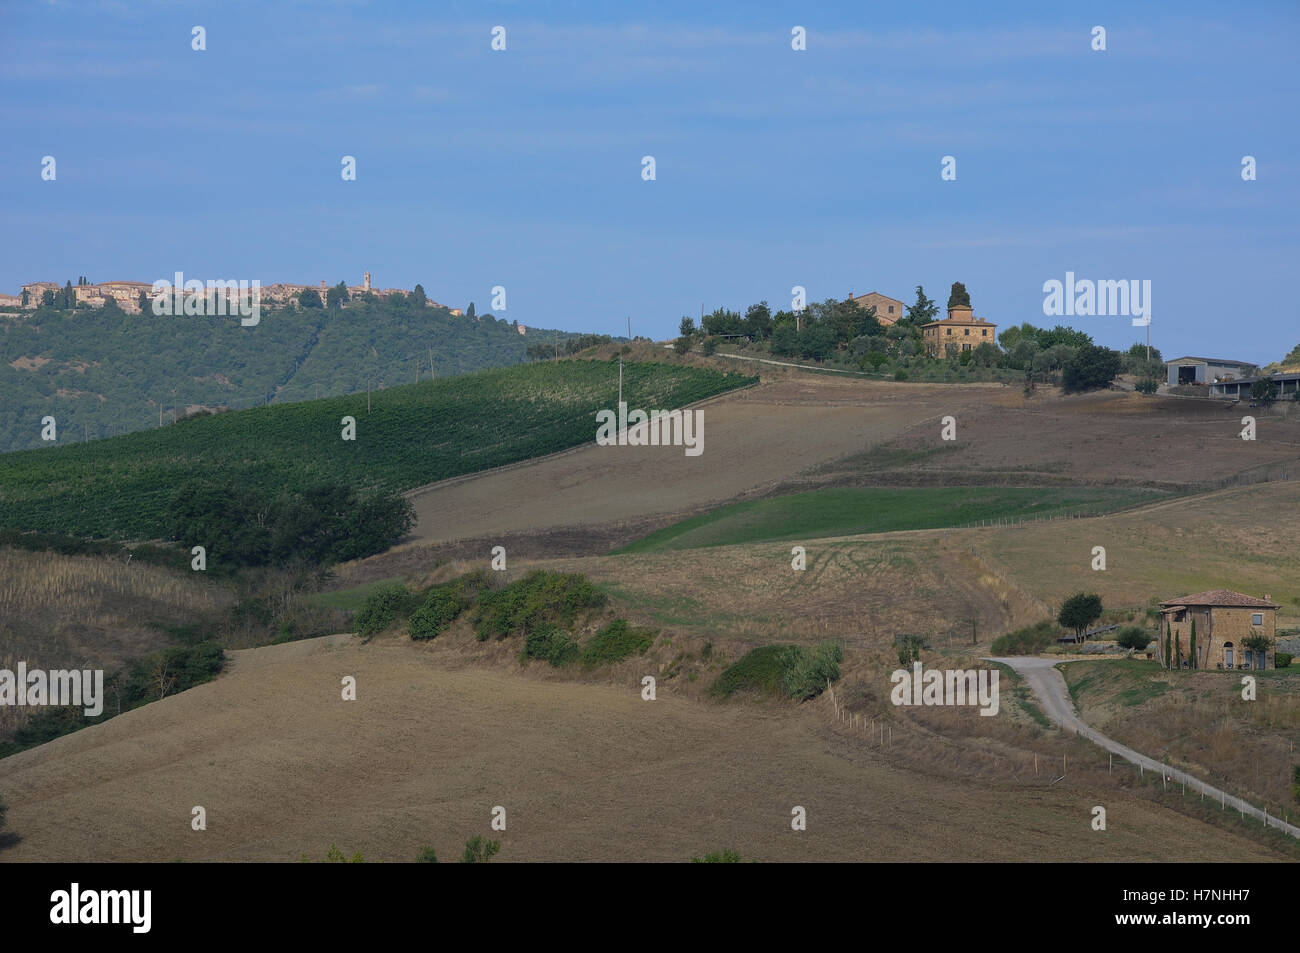 Beautiful landscapes in the Tuscan countryside near Montepulciano,italy Stock Photo